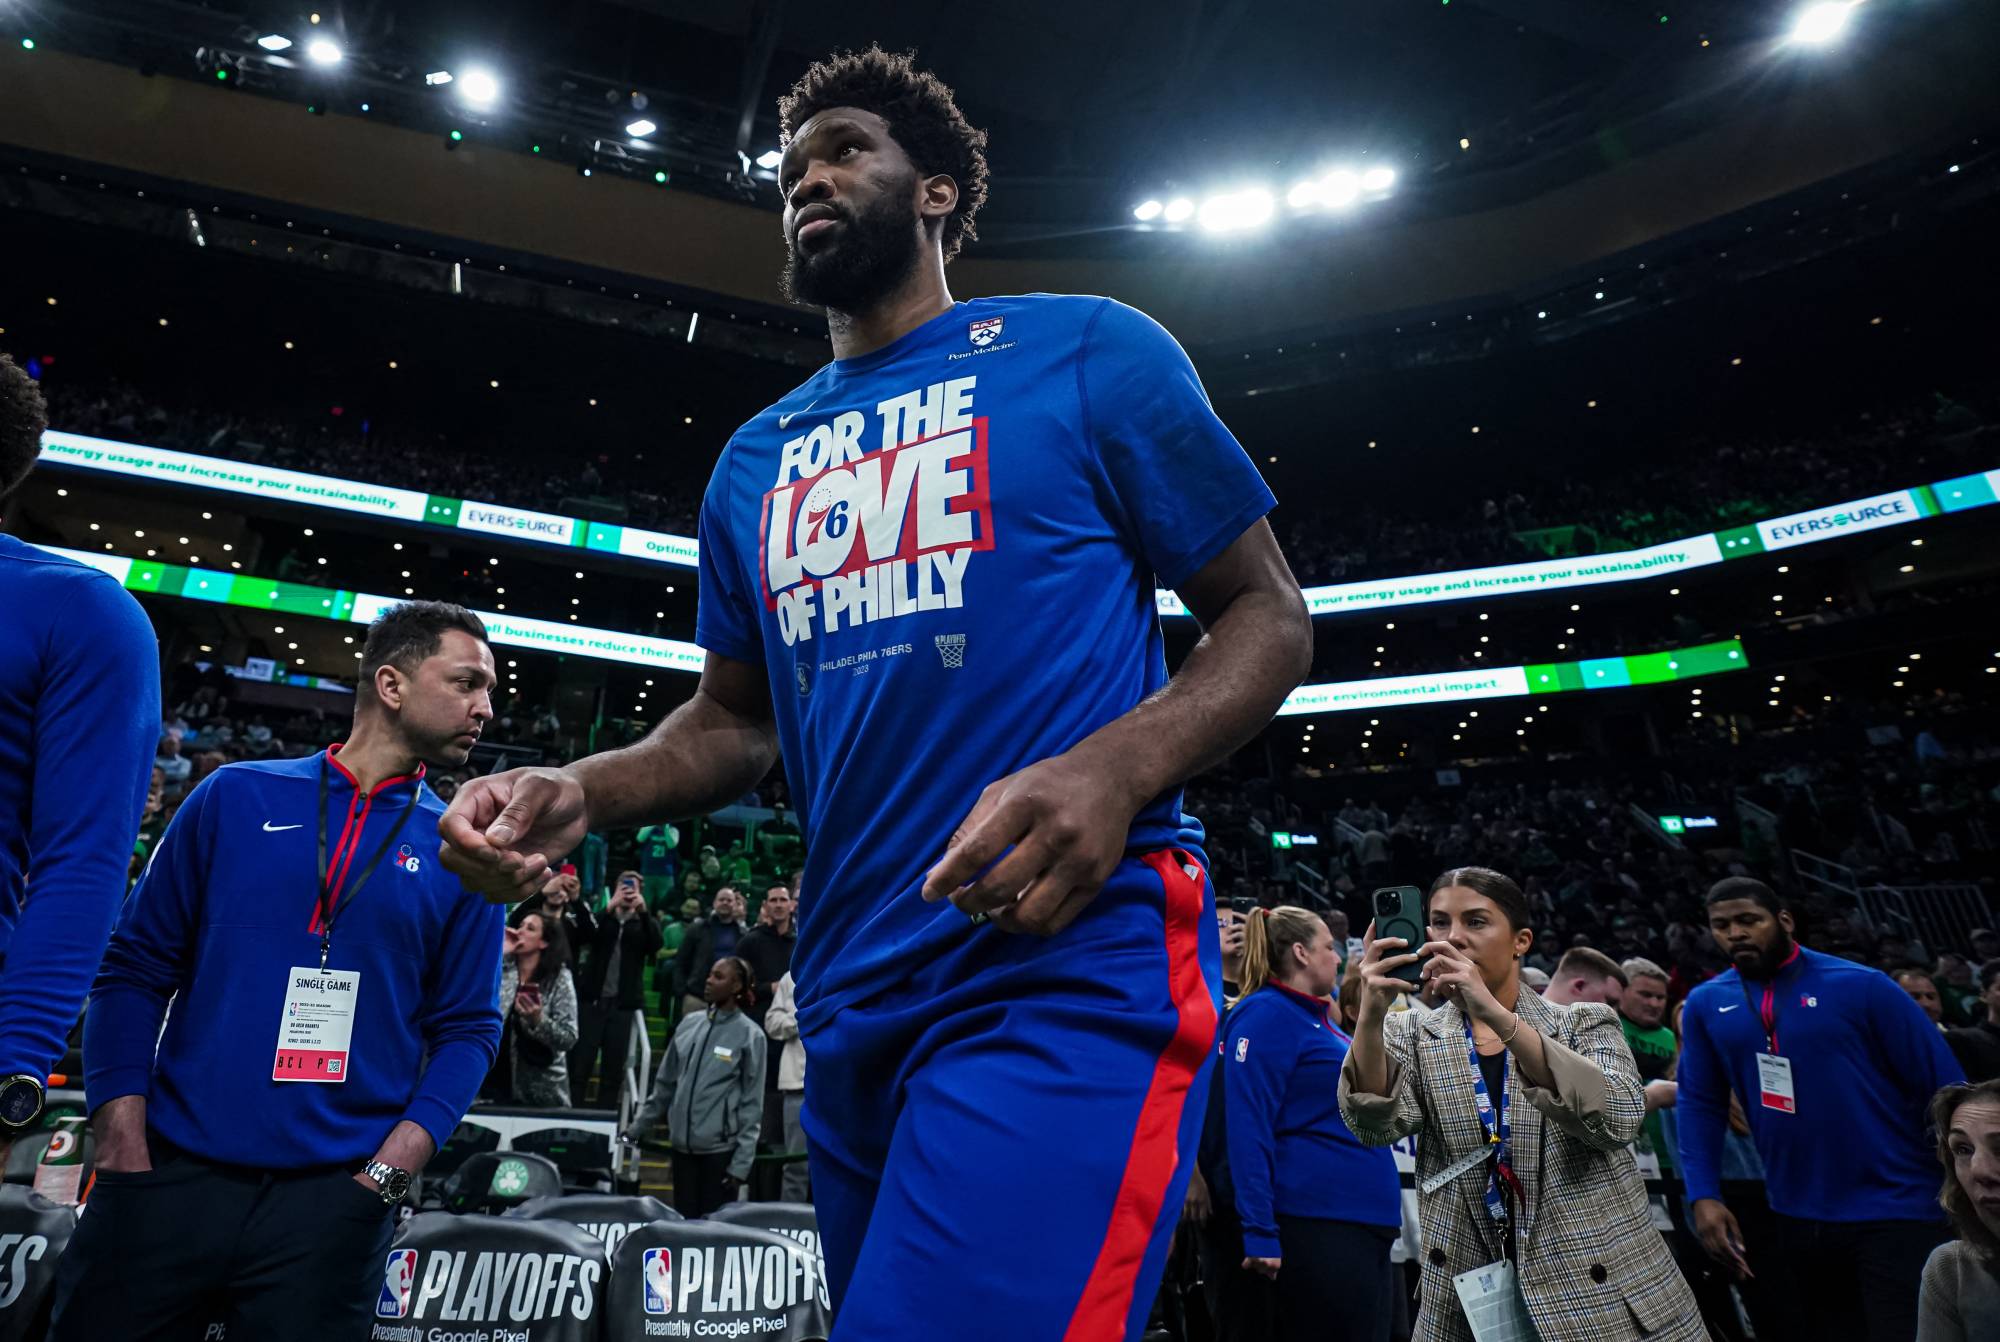 Sixers star Joel Embiid hopes improbable path to MVP award inspires ...